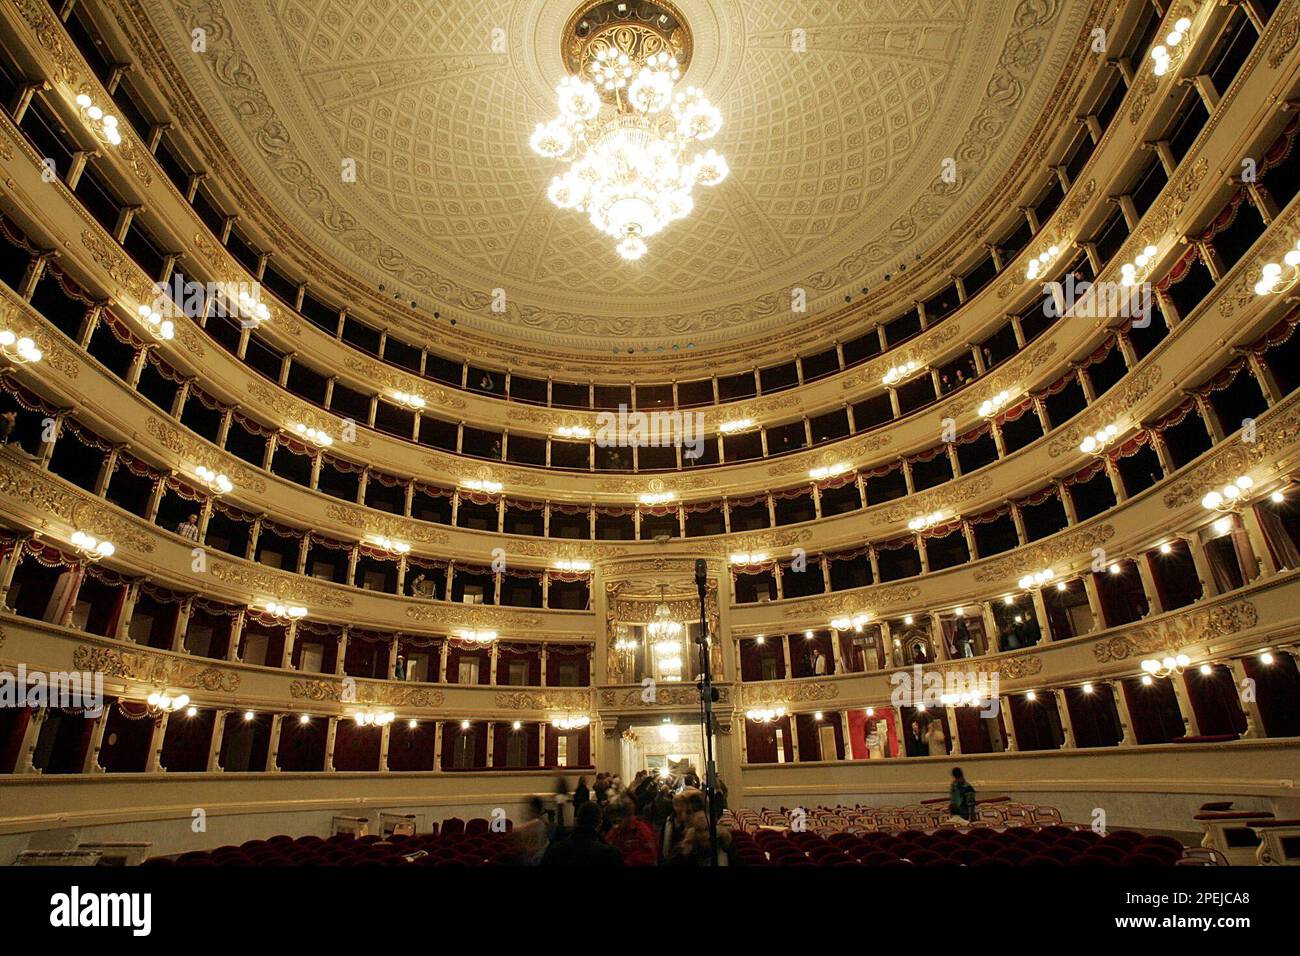 A view of the La Scala opera house, in Milan, Italy, Friday, Nov. 12, 2004.  After a three-year 'exile' on the city's outskirts, the famed opera company  is returning home to its